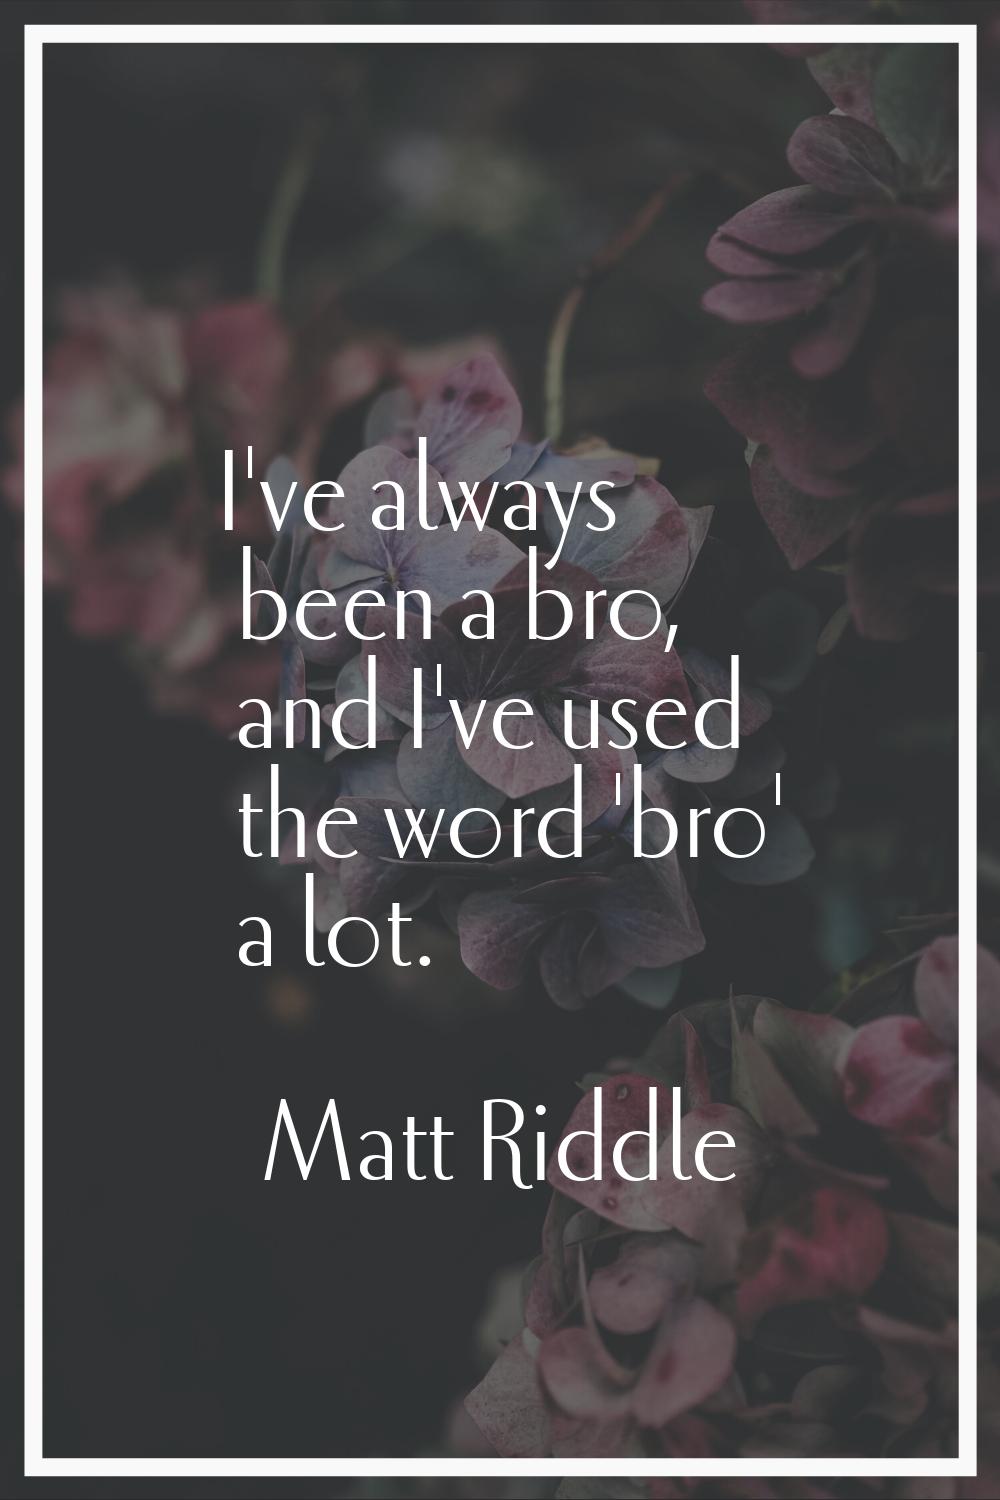 I've always been a bro, and I've used the word 'bro' a lot.